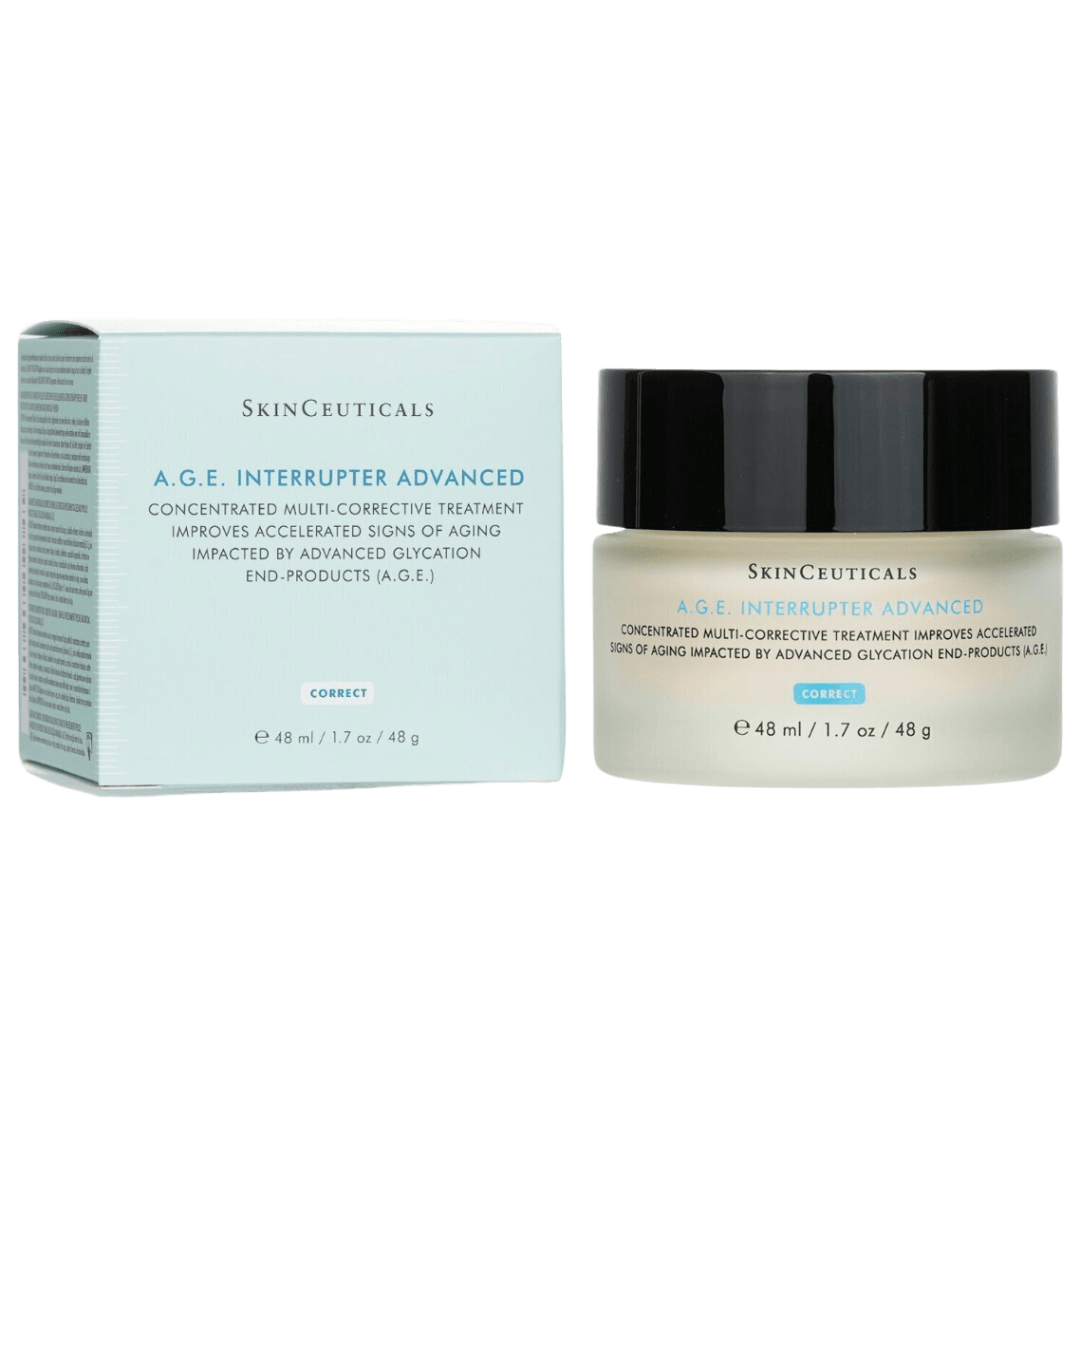 Daily Vanity Beauty Awards 2024 Best Skincare SkinCeuticals A.G.E. Interrupter Advanced Voted By Beauty Experts